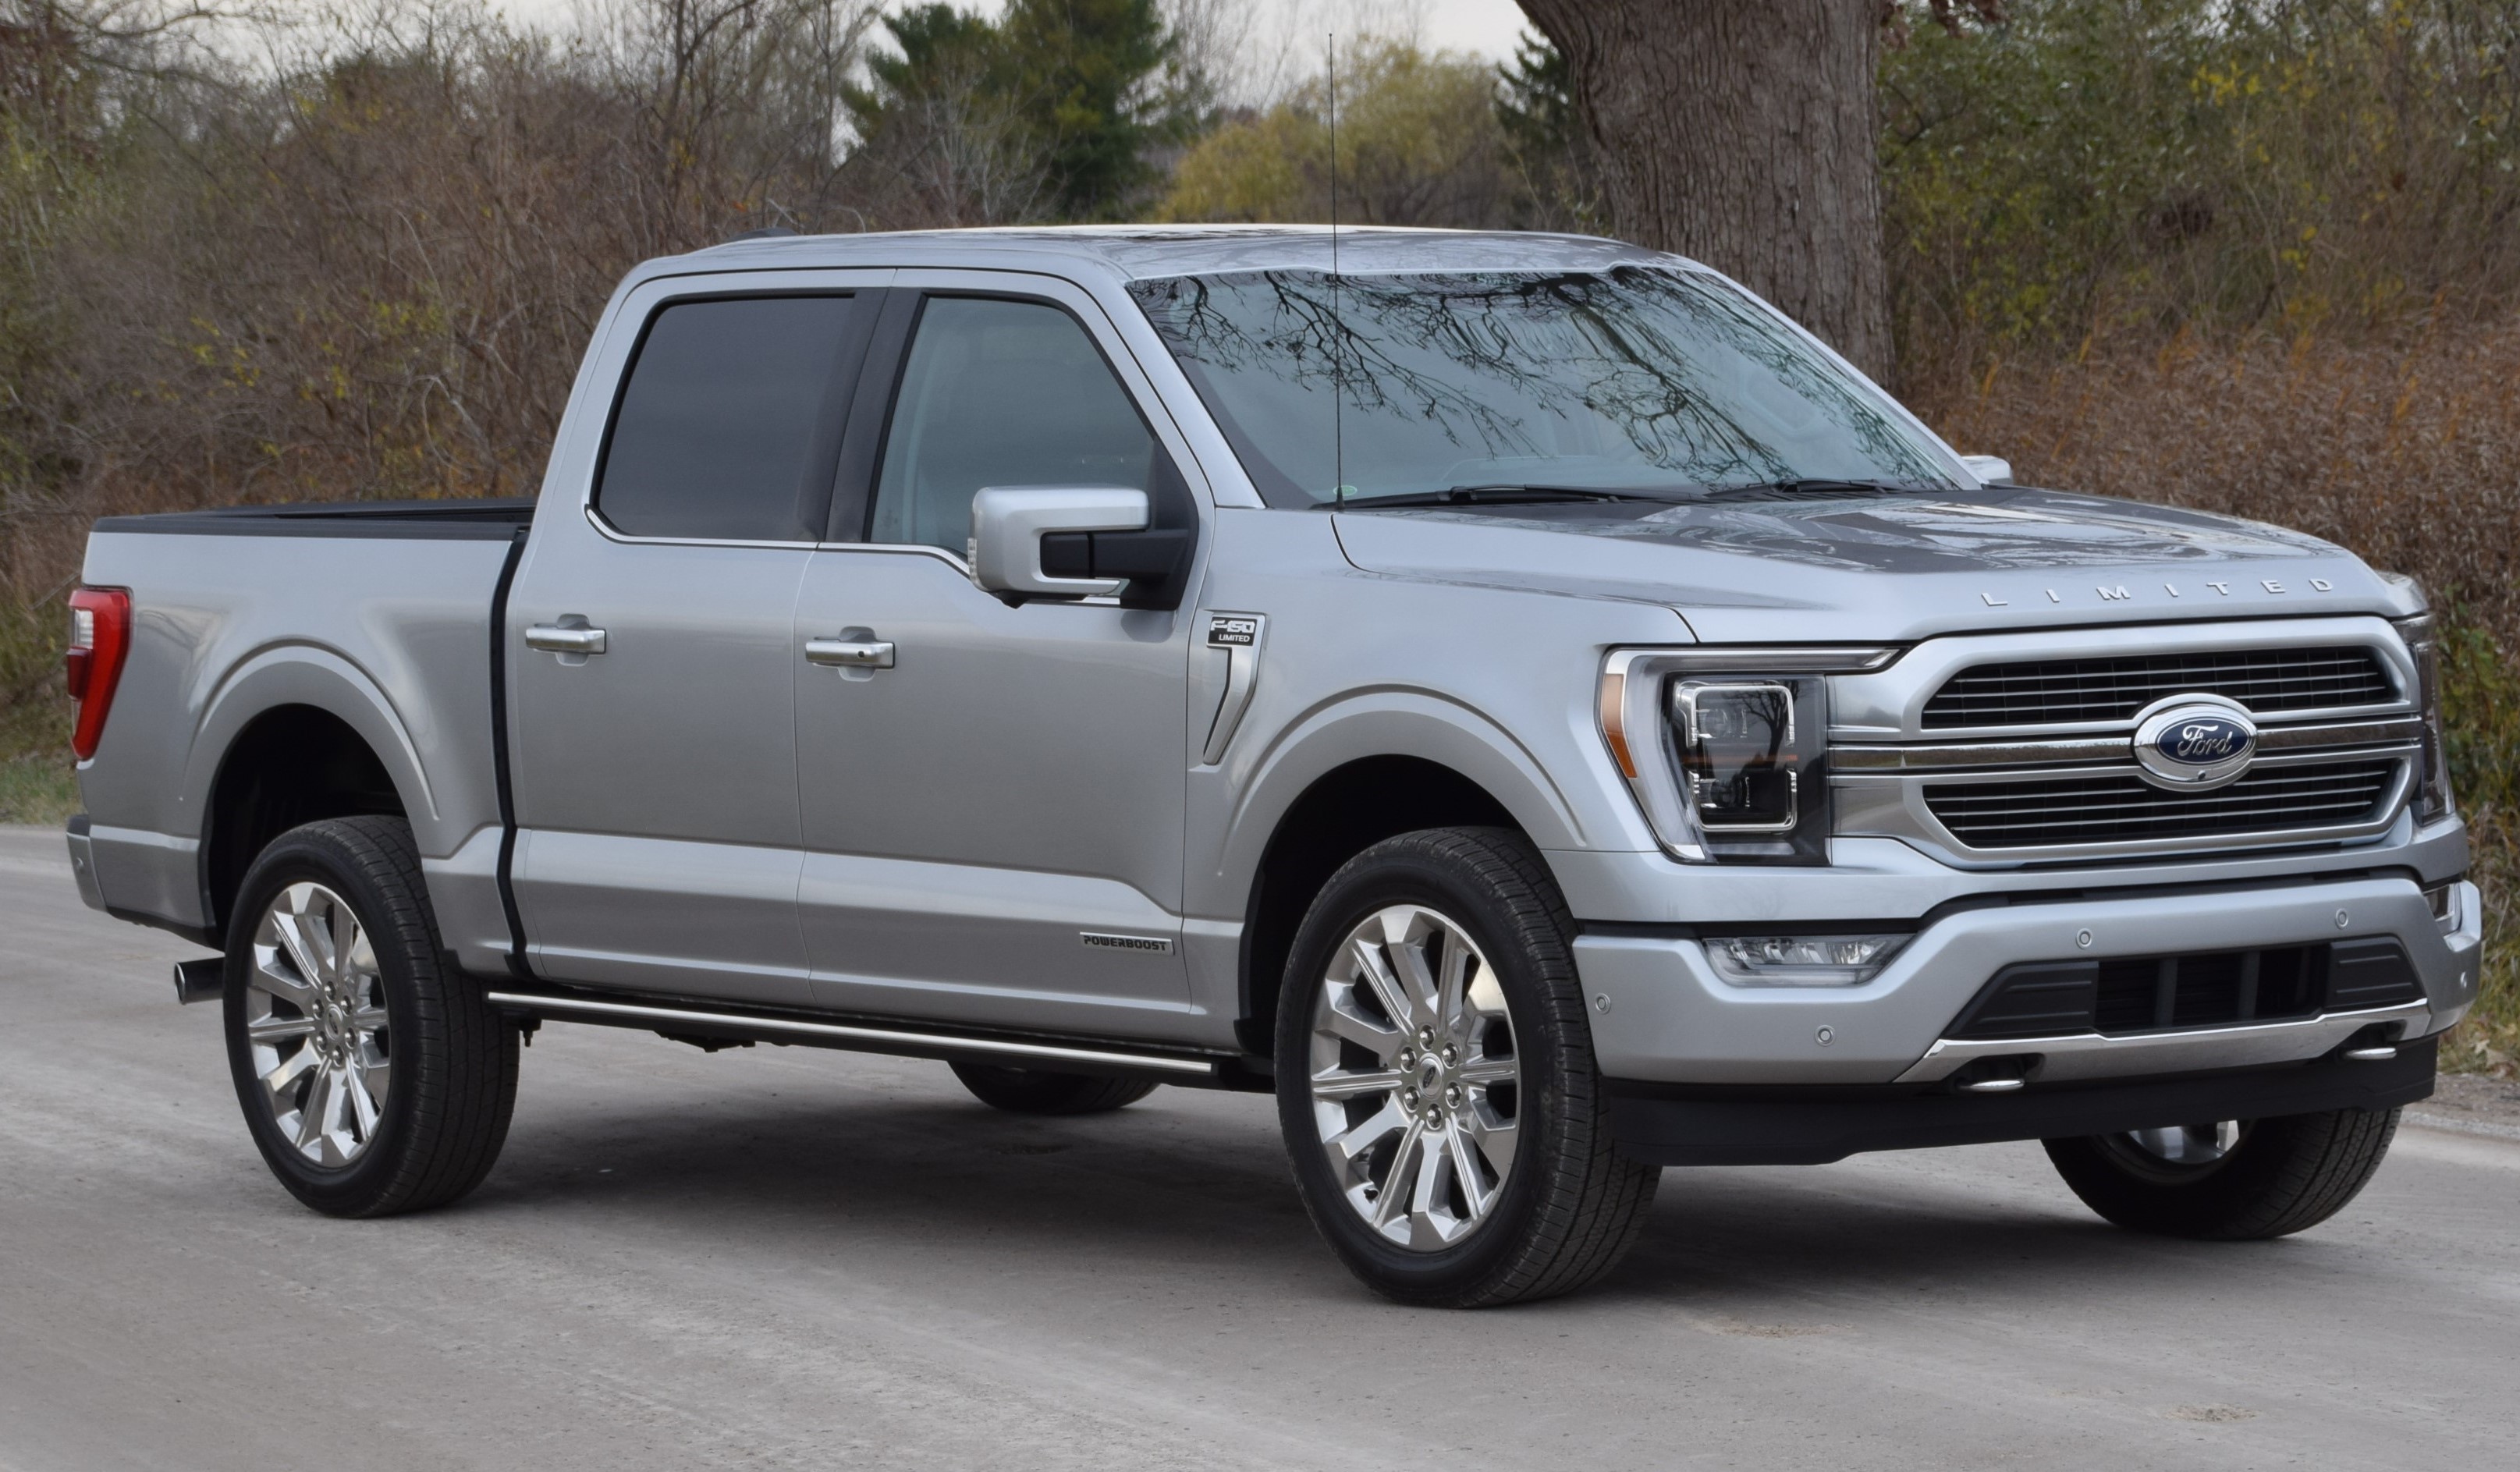 27 2021 Ford F-150 silver front quarter.JPG